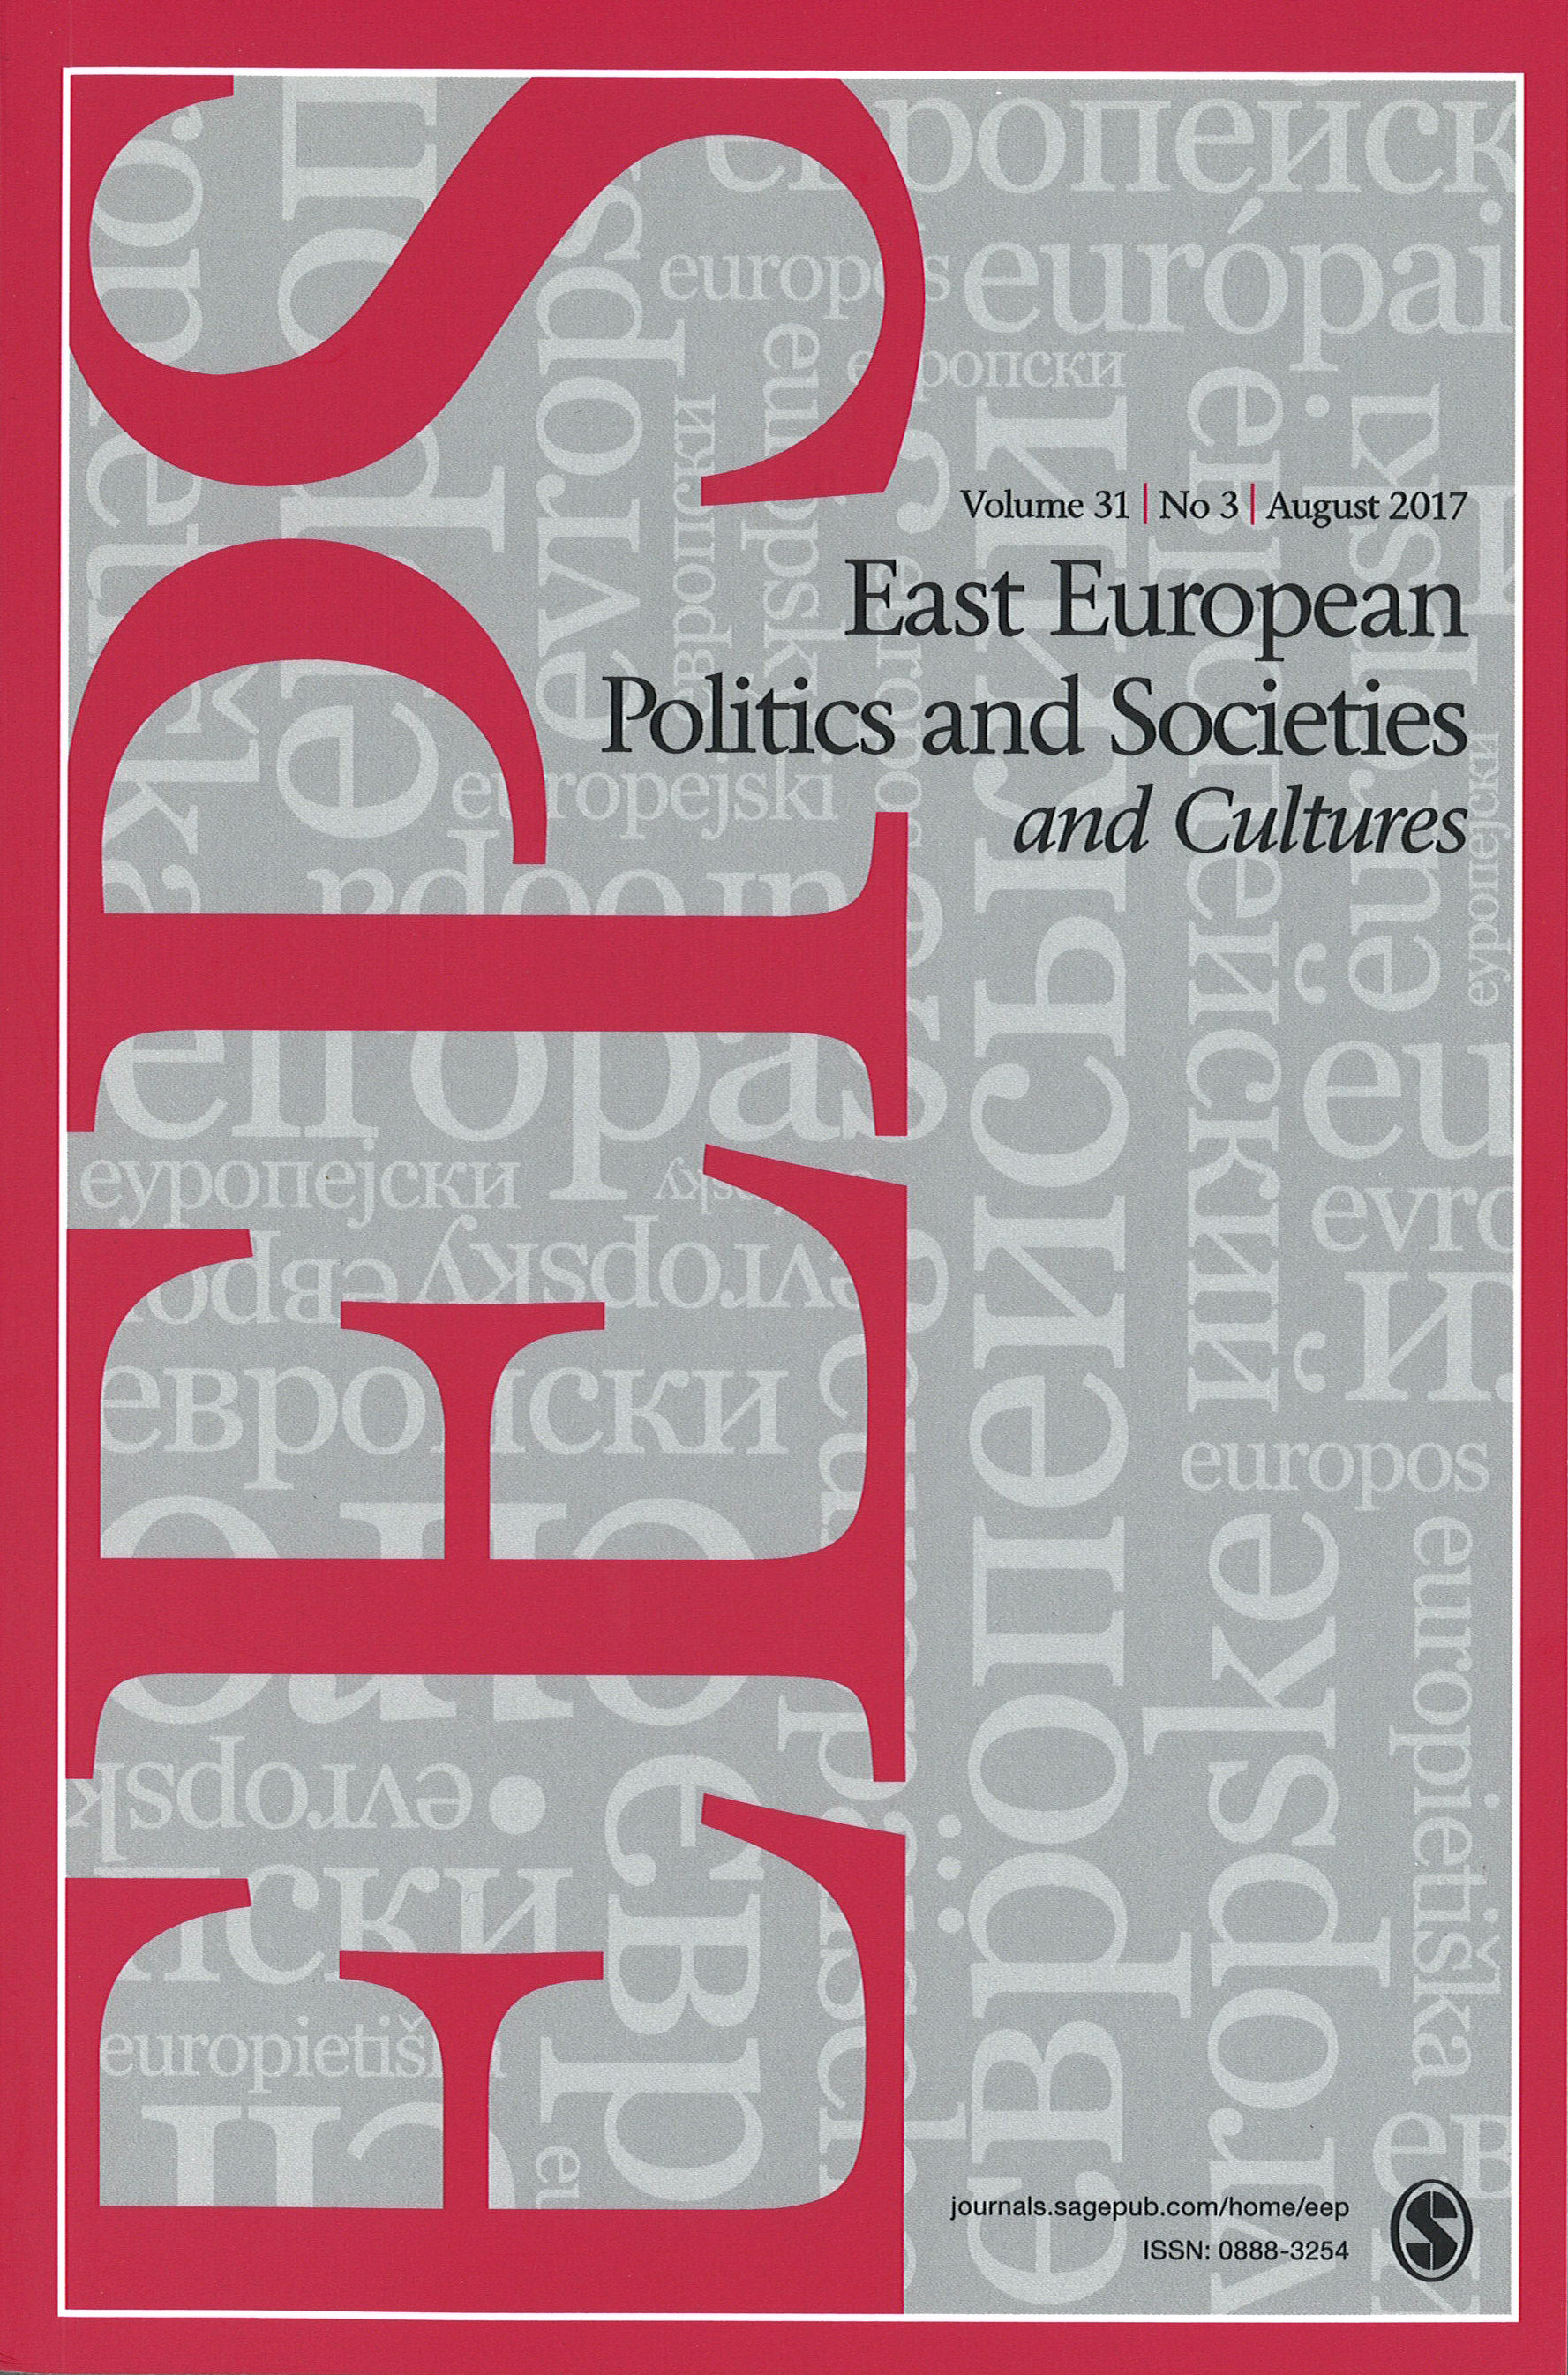 Photo of the publication East European Politics and Societies: and Cultures, Vol 31, Issue 3, 2017